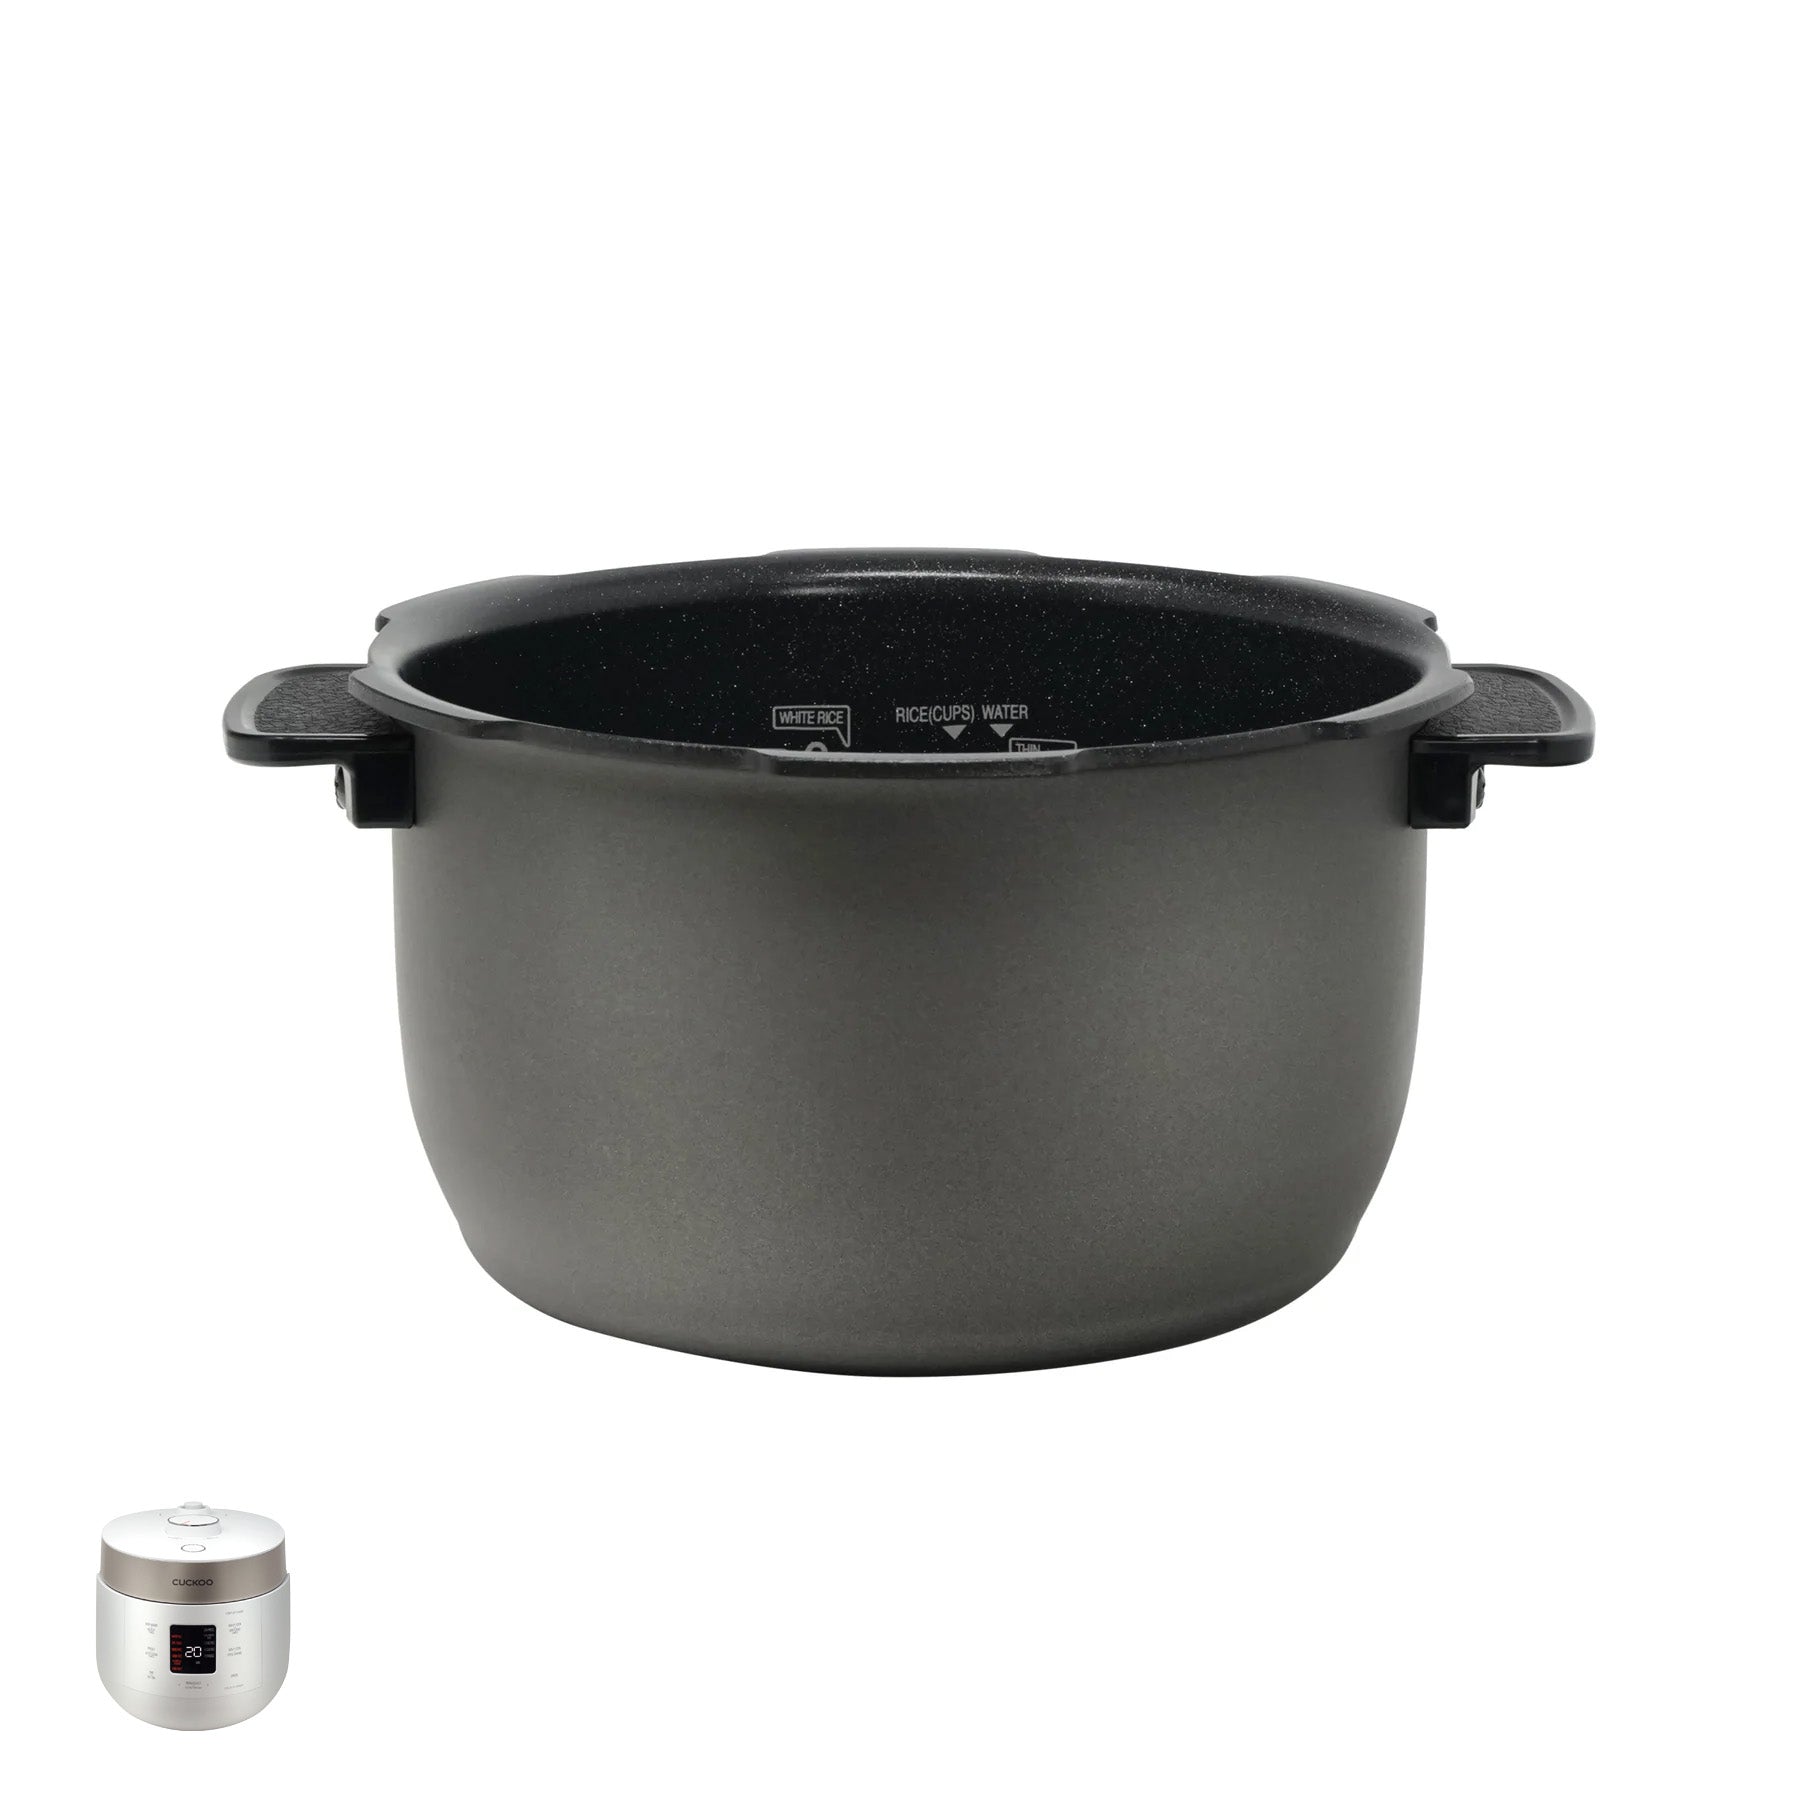  CUCKOO Replacement Inner Pot for Rice Cooker Model CRP-ST1009F:  Home & Kitchen